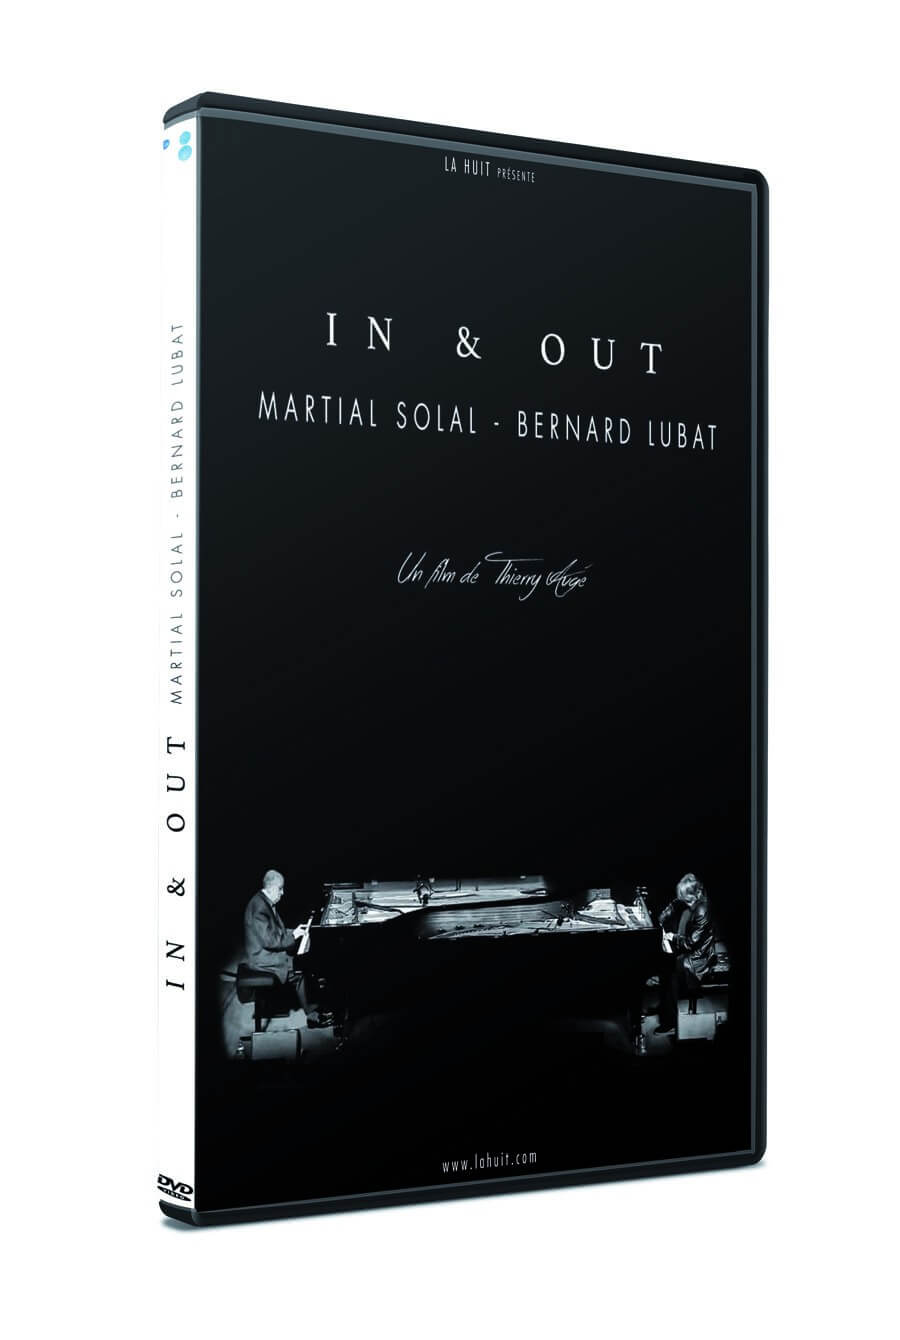 IN & OUT - MARTIAL SOLAL & BERNARD LUBAT